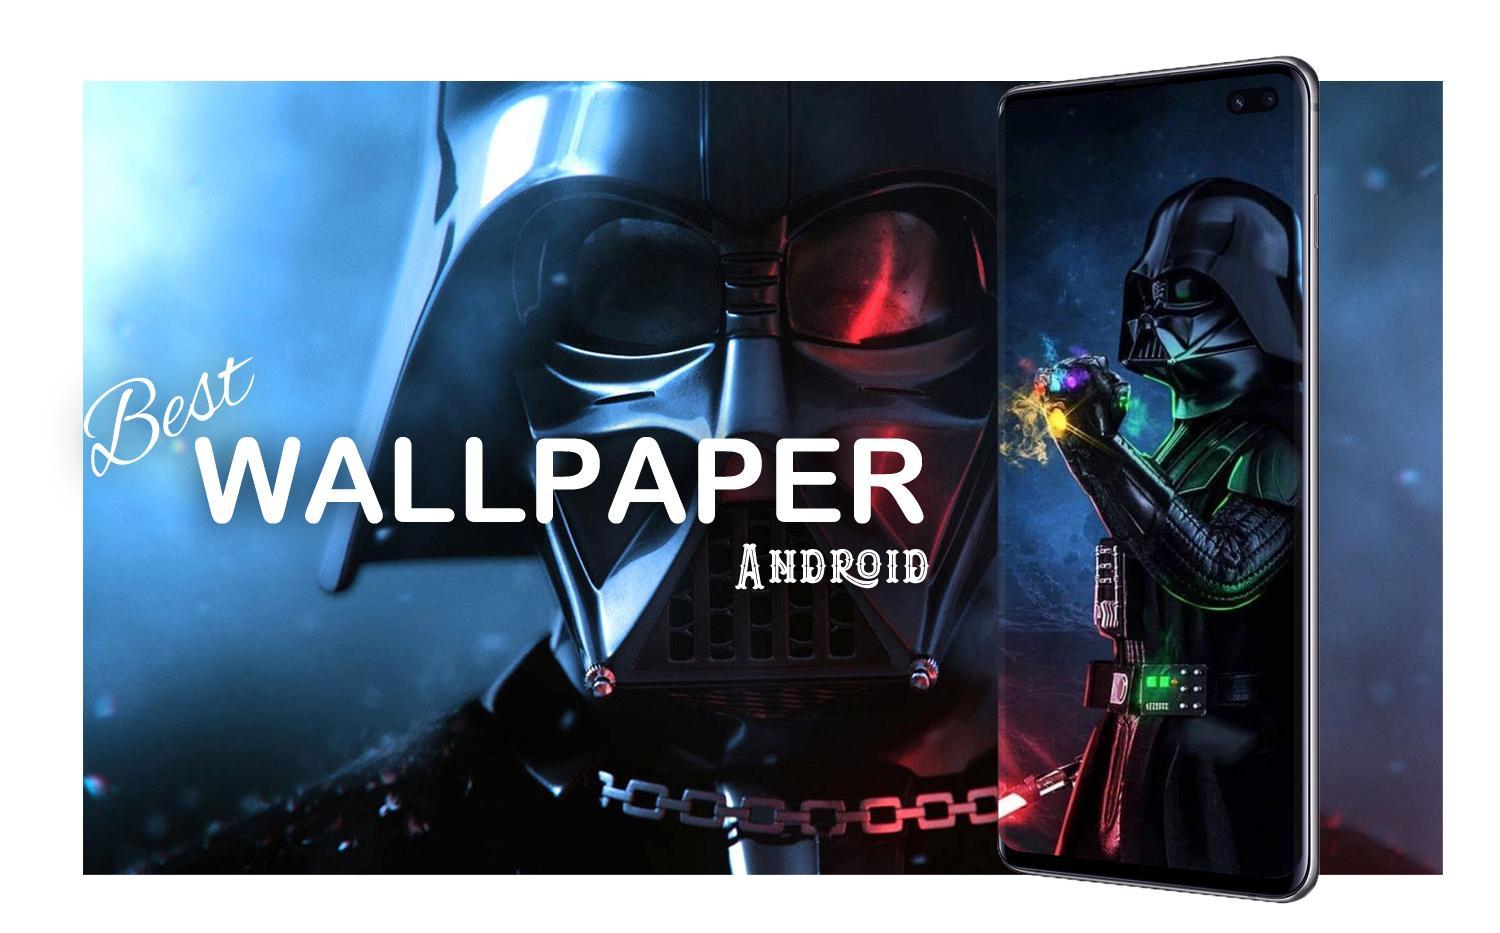 Darth Vader Wallpaper Hd For Android Apk Download